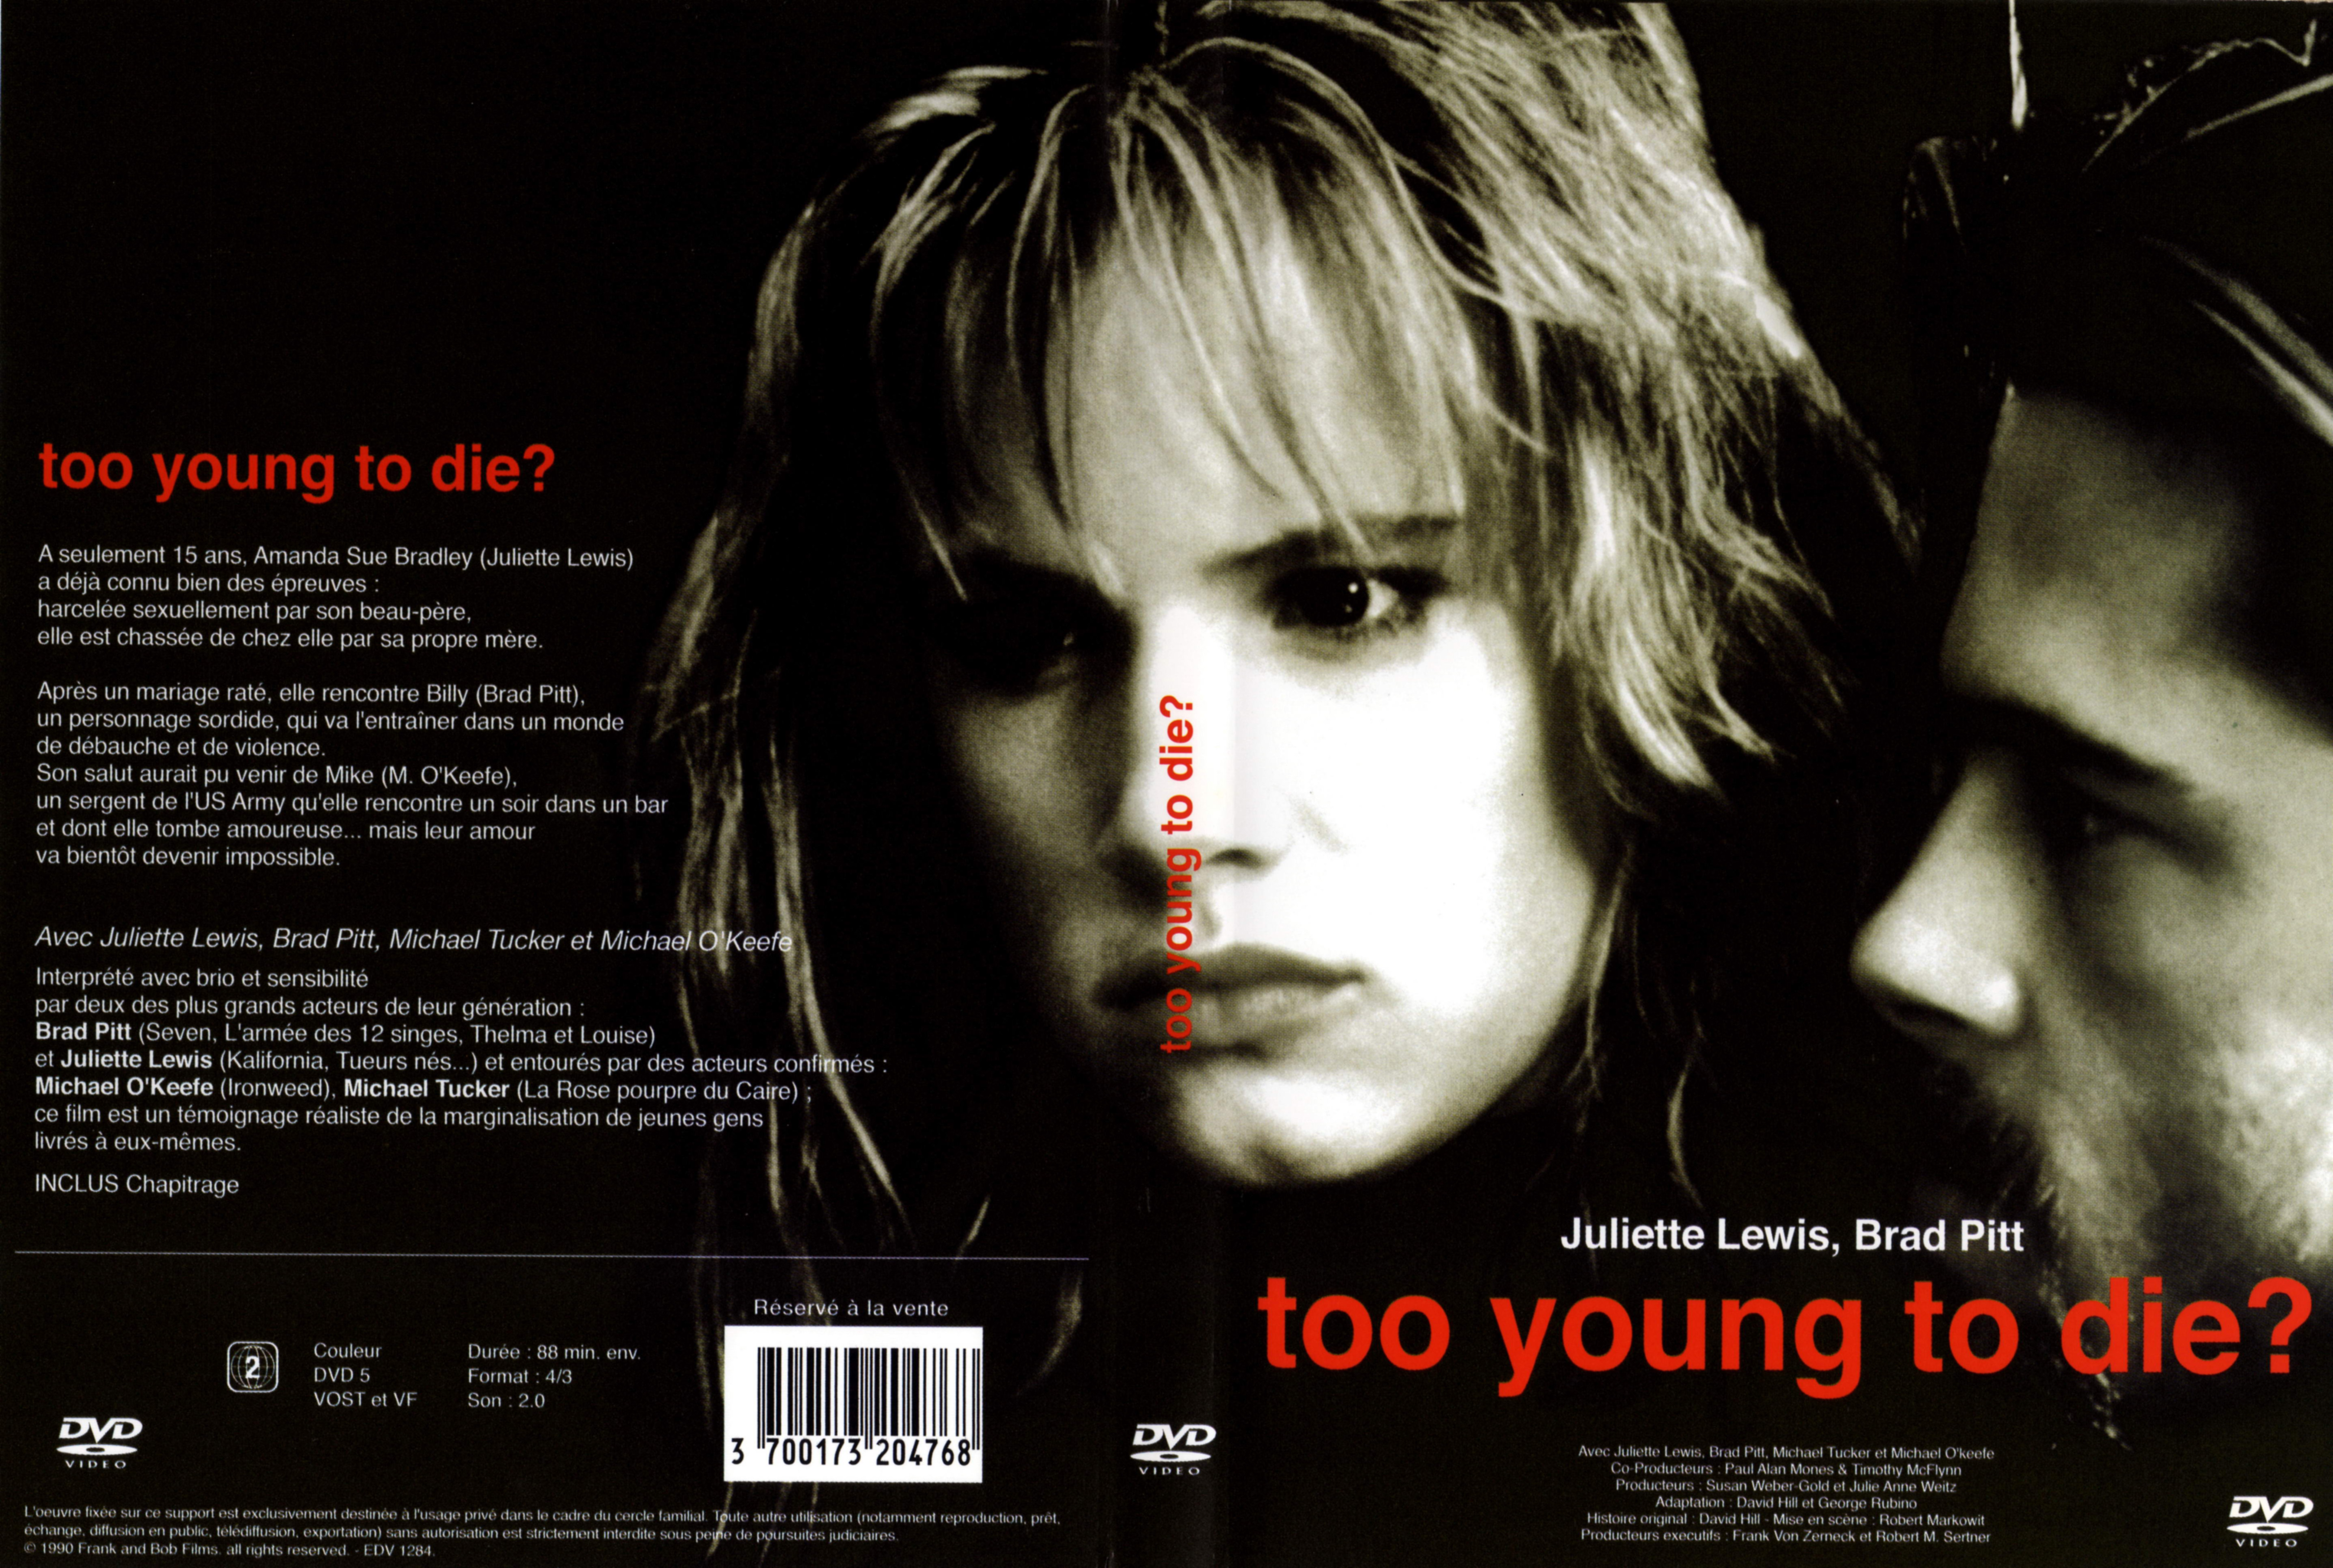 Jaquette DVD Too young to die